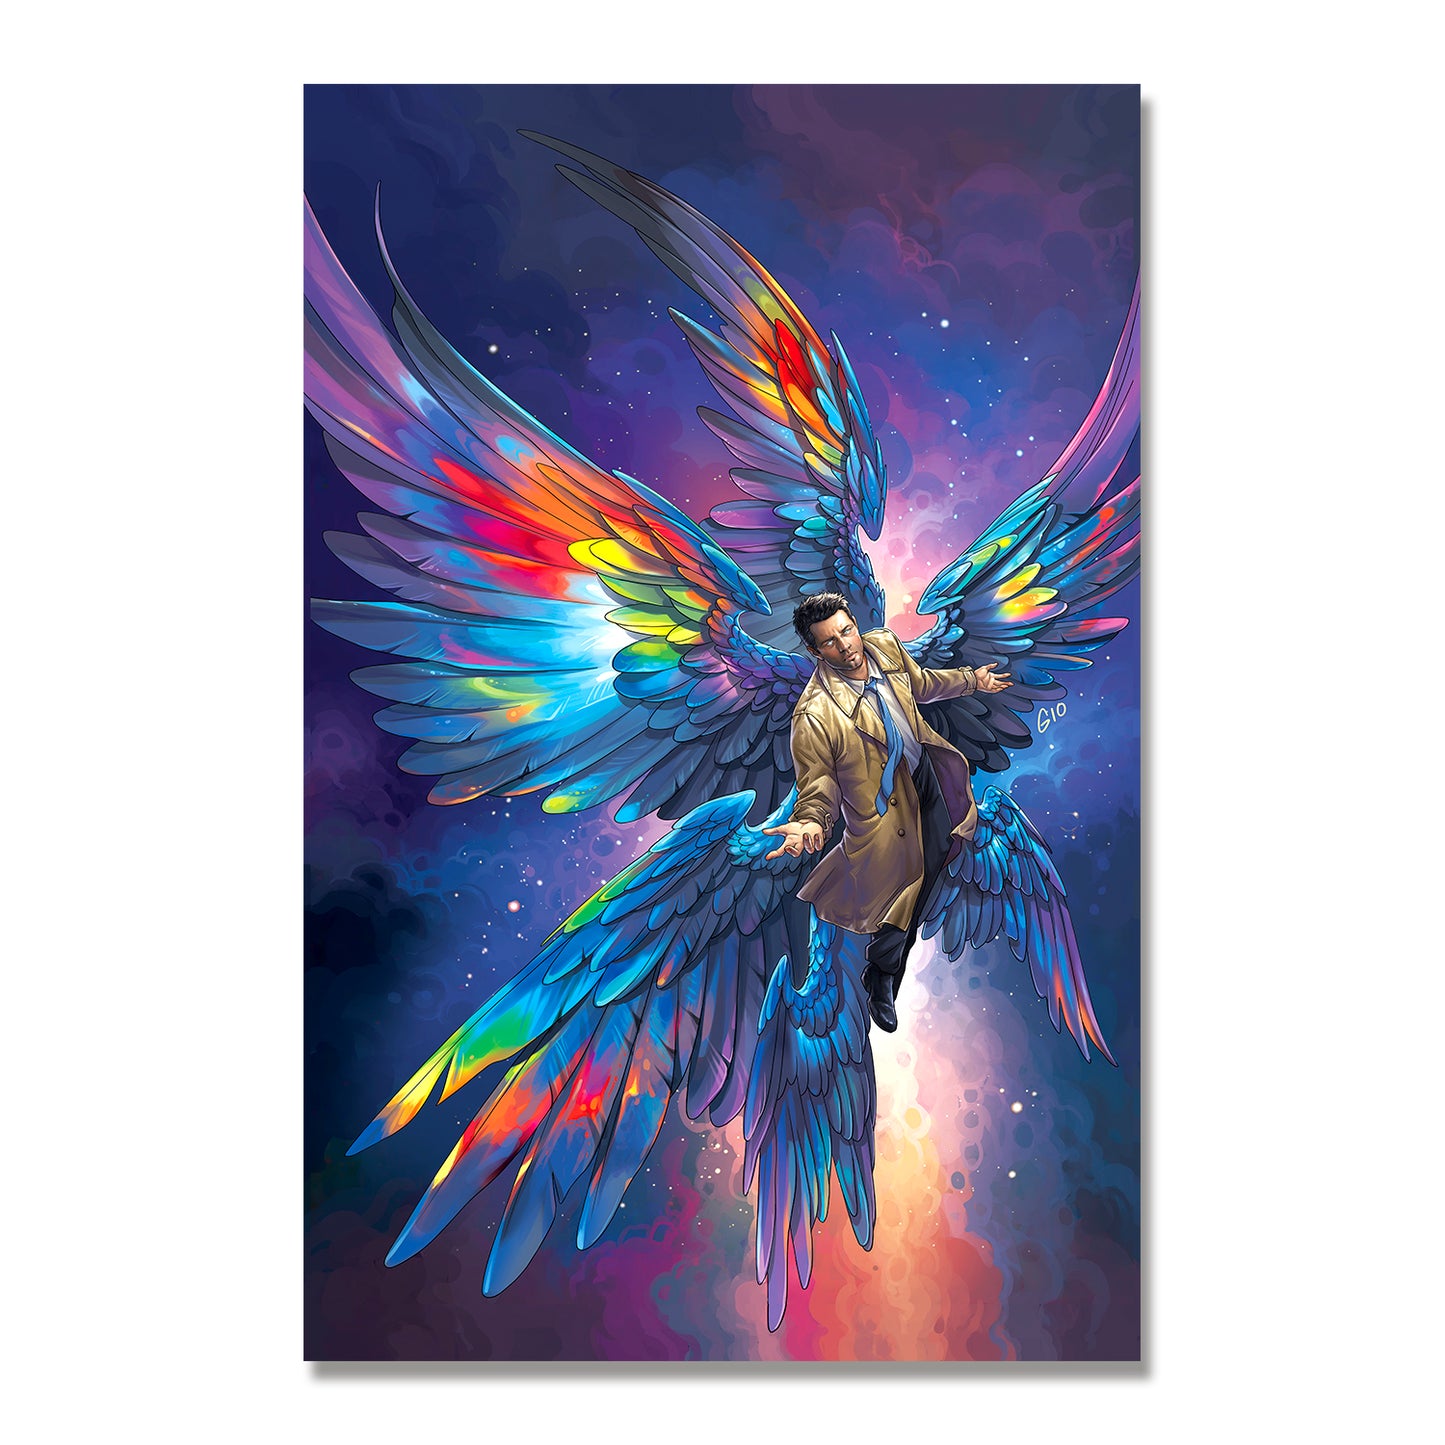 A painting against a white background. The painting depicts the angel Castiel with rainbow wings, soaring through the nighttime sky.